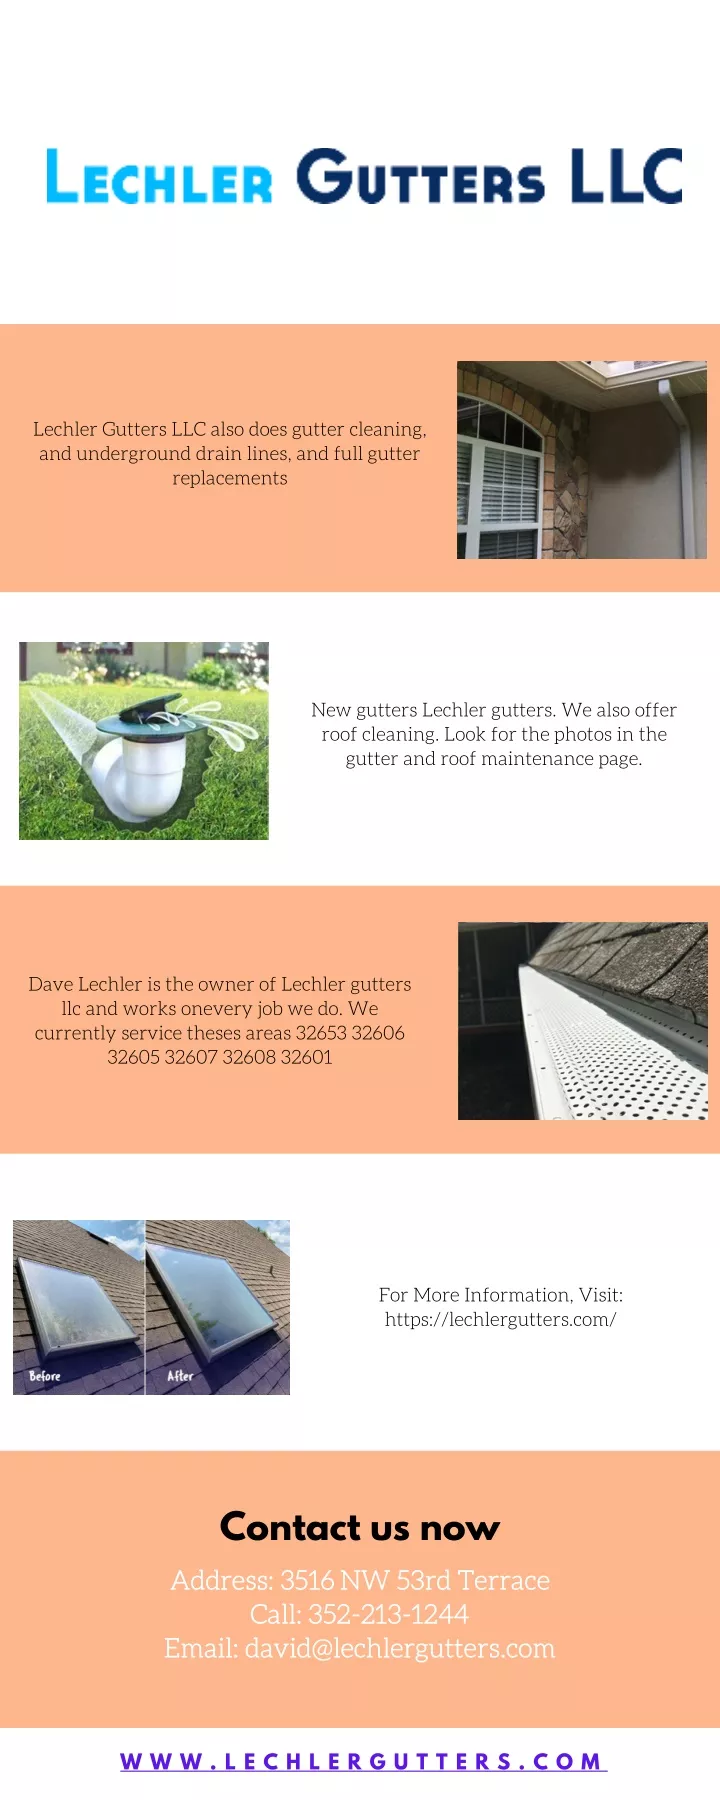 lechler gutters llc also does gutter cleaning